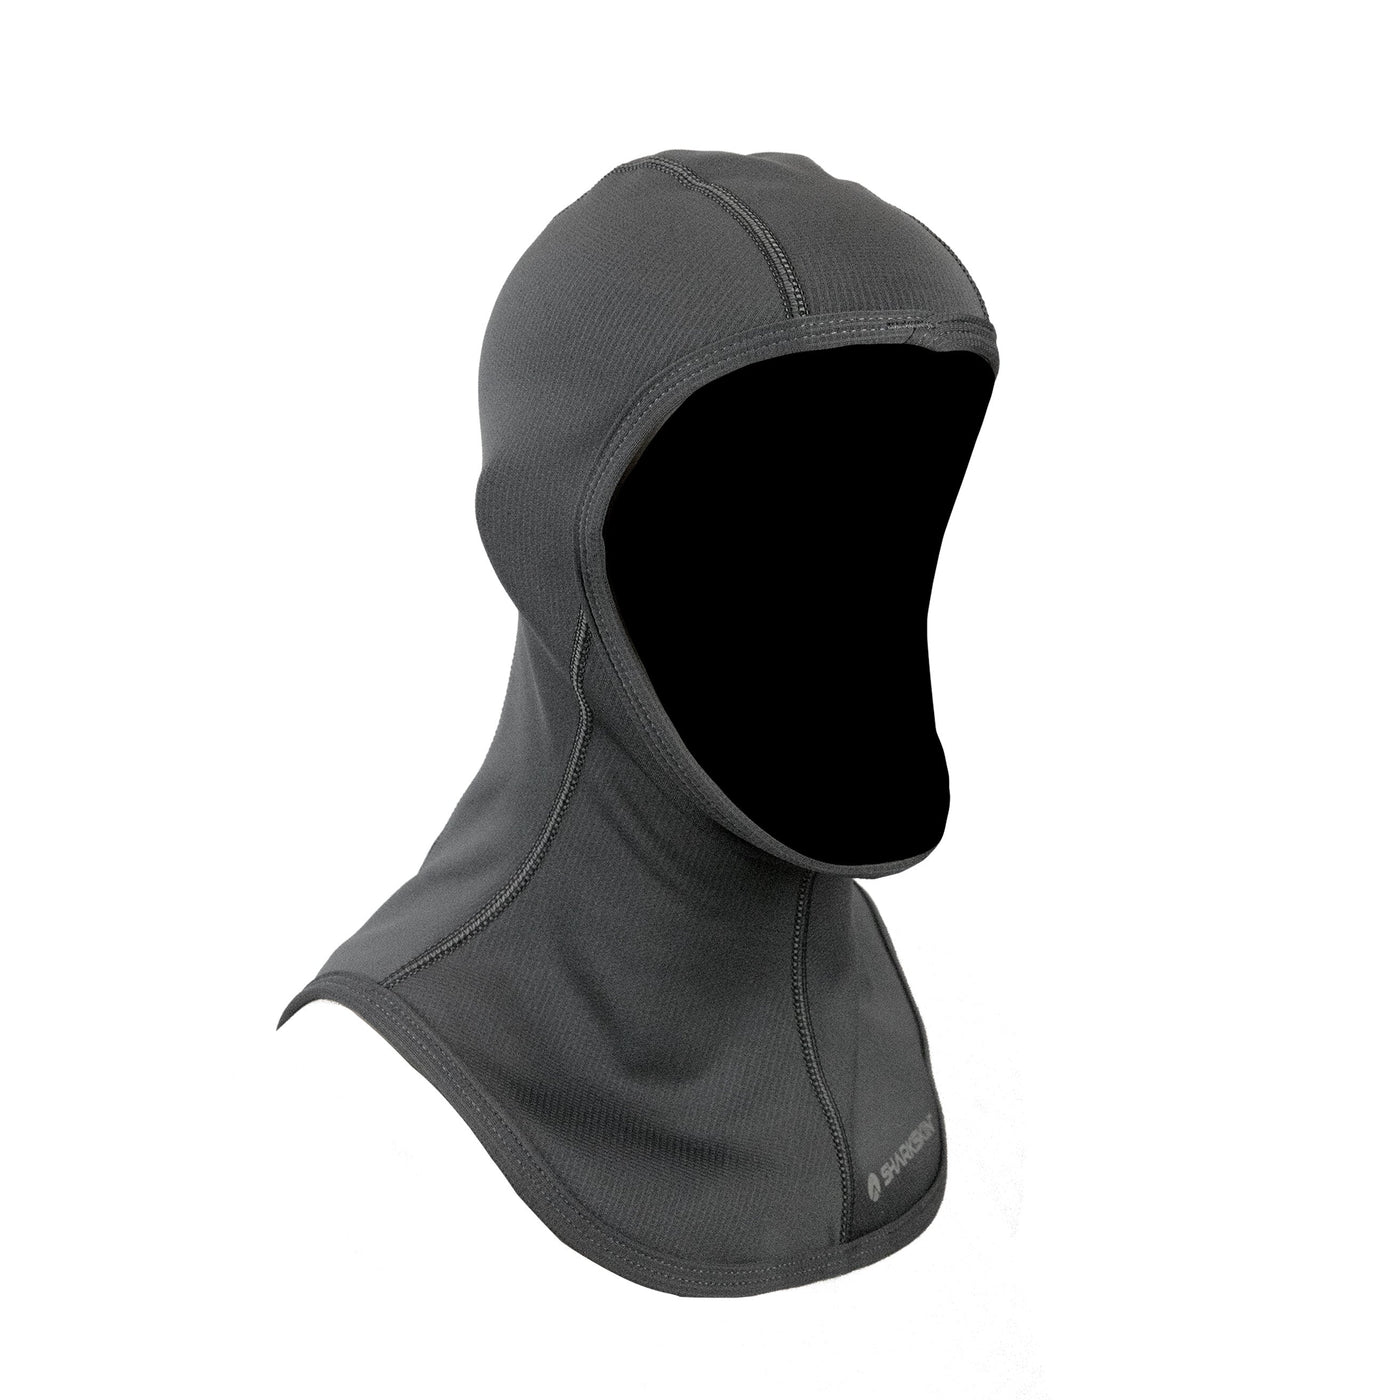 T2 CHILLPROOF HOOD (SECONDS)